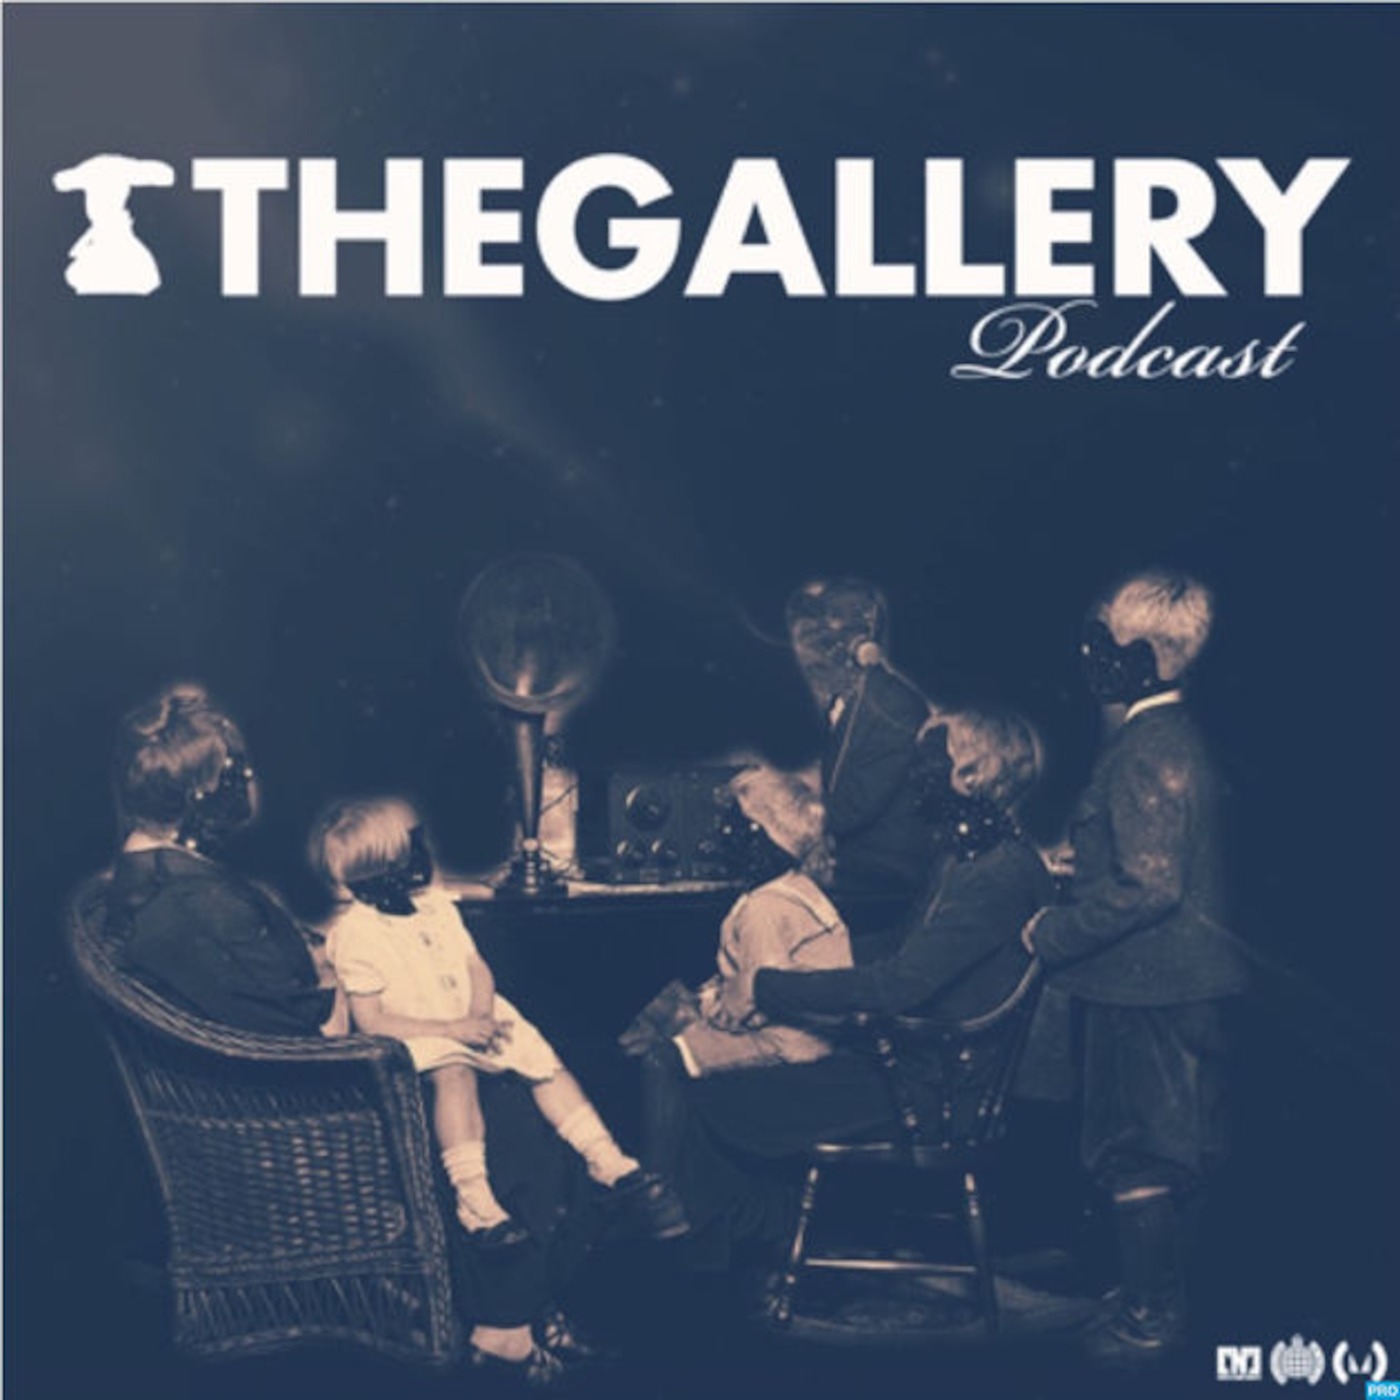 The Gallery Podcast Episode 181 W/ Tristan D + Brennan Heart